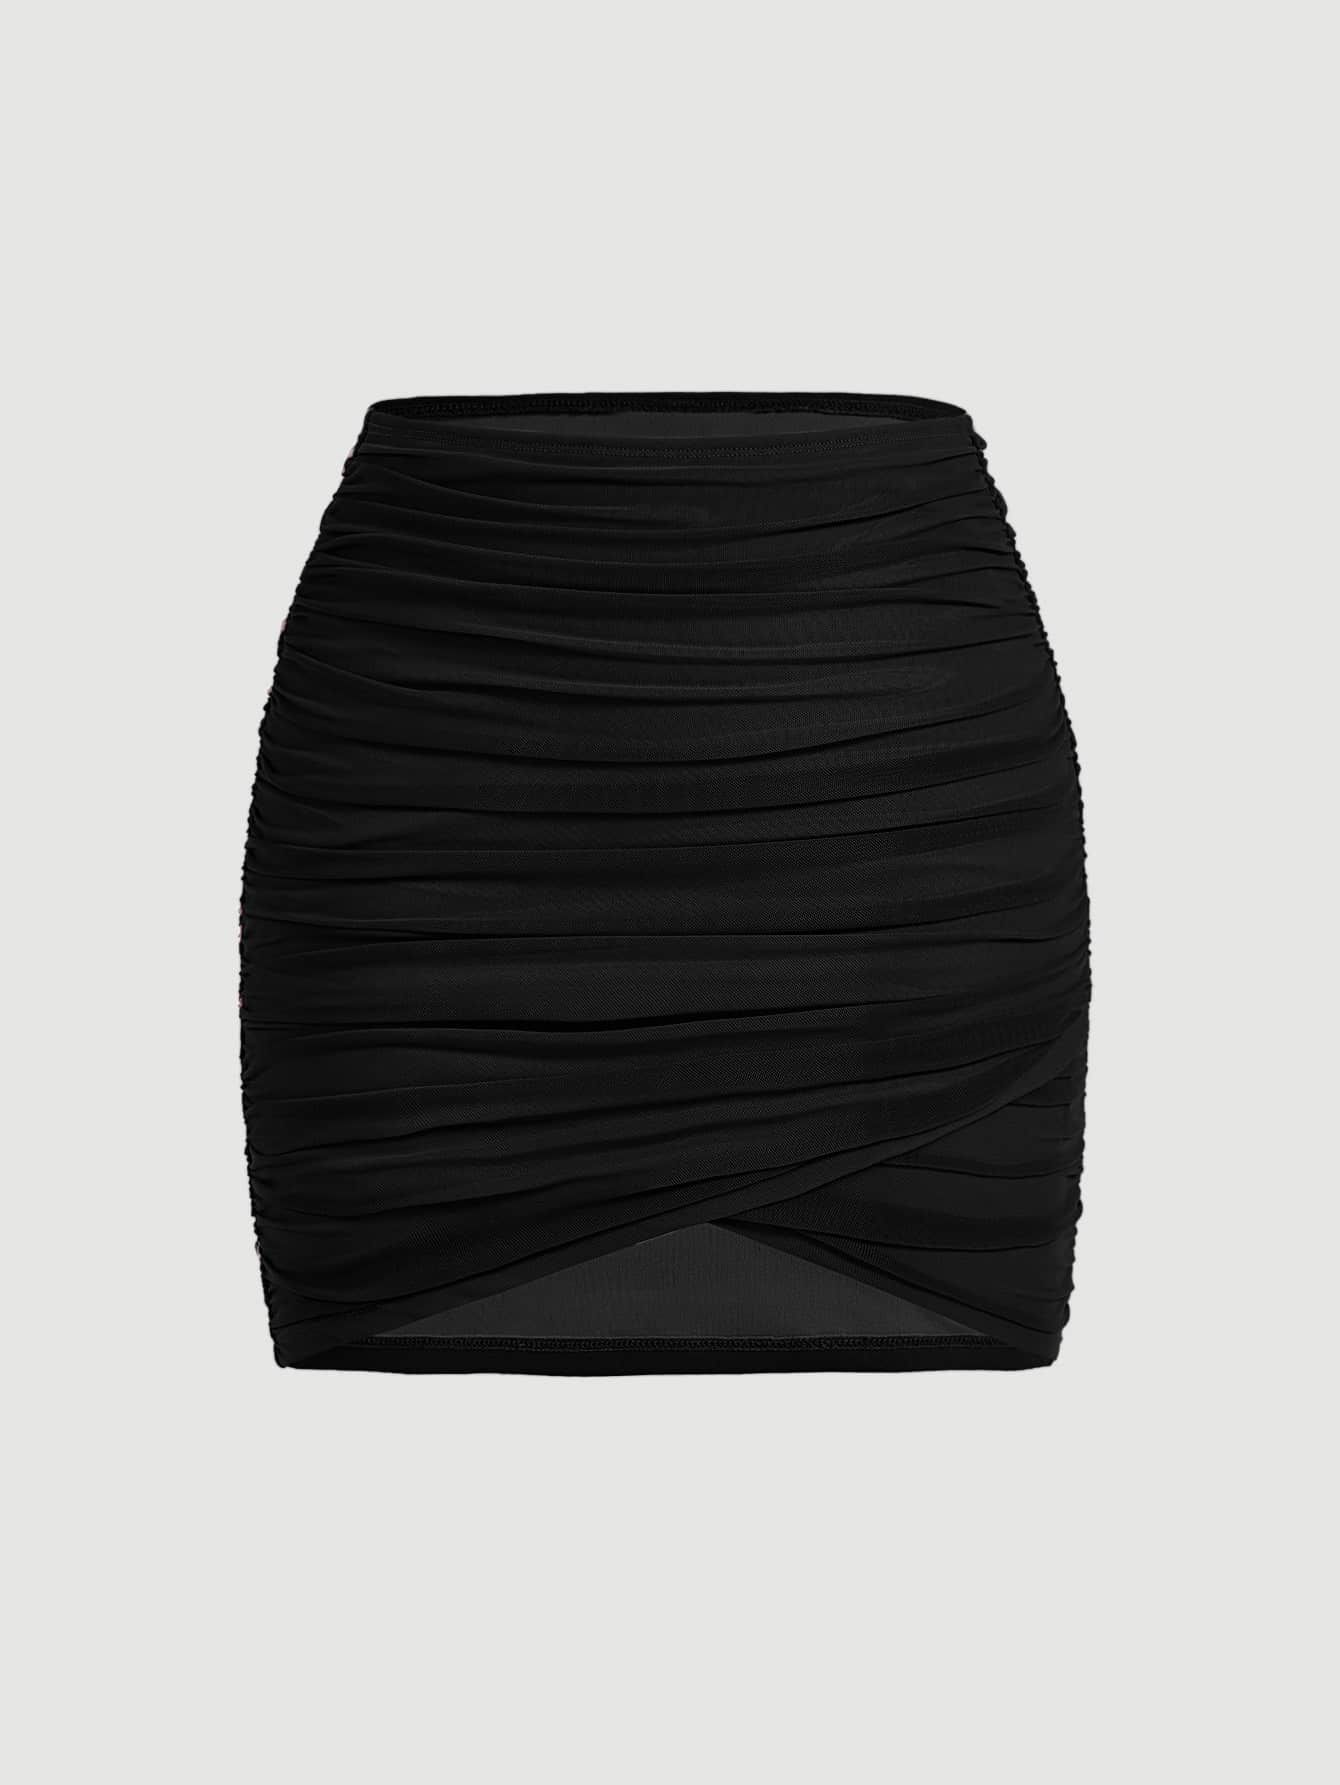 Chic and Stylish: Embrace Sophistication with Bodycon Skirts